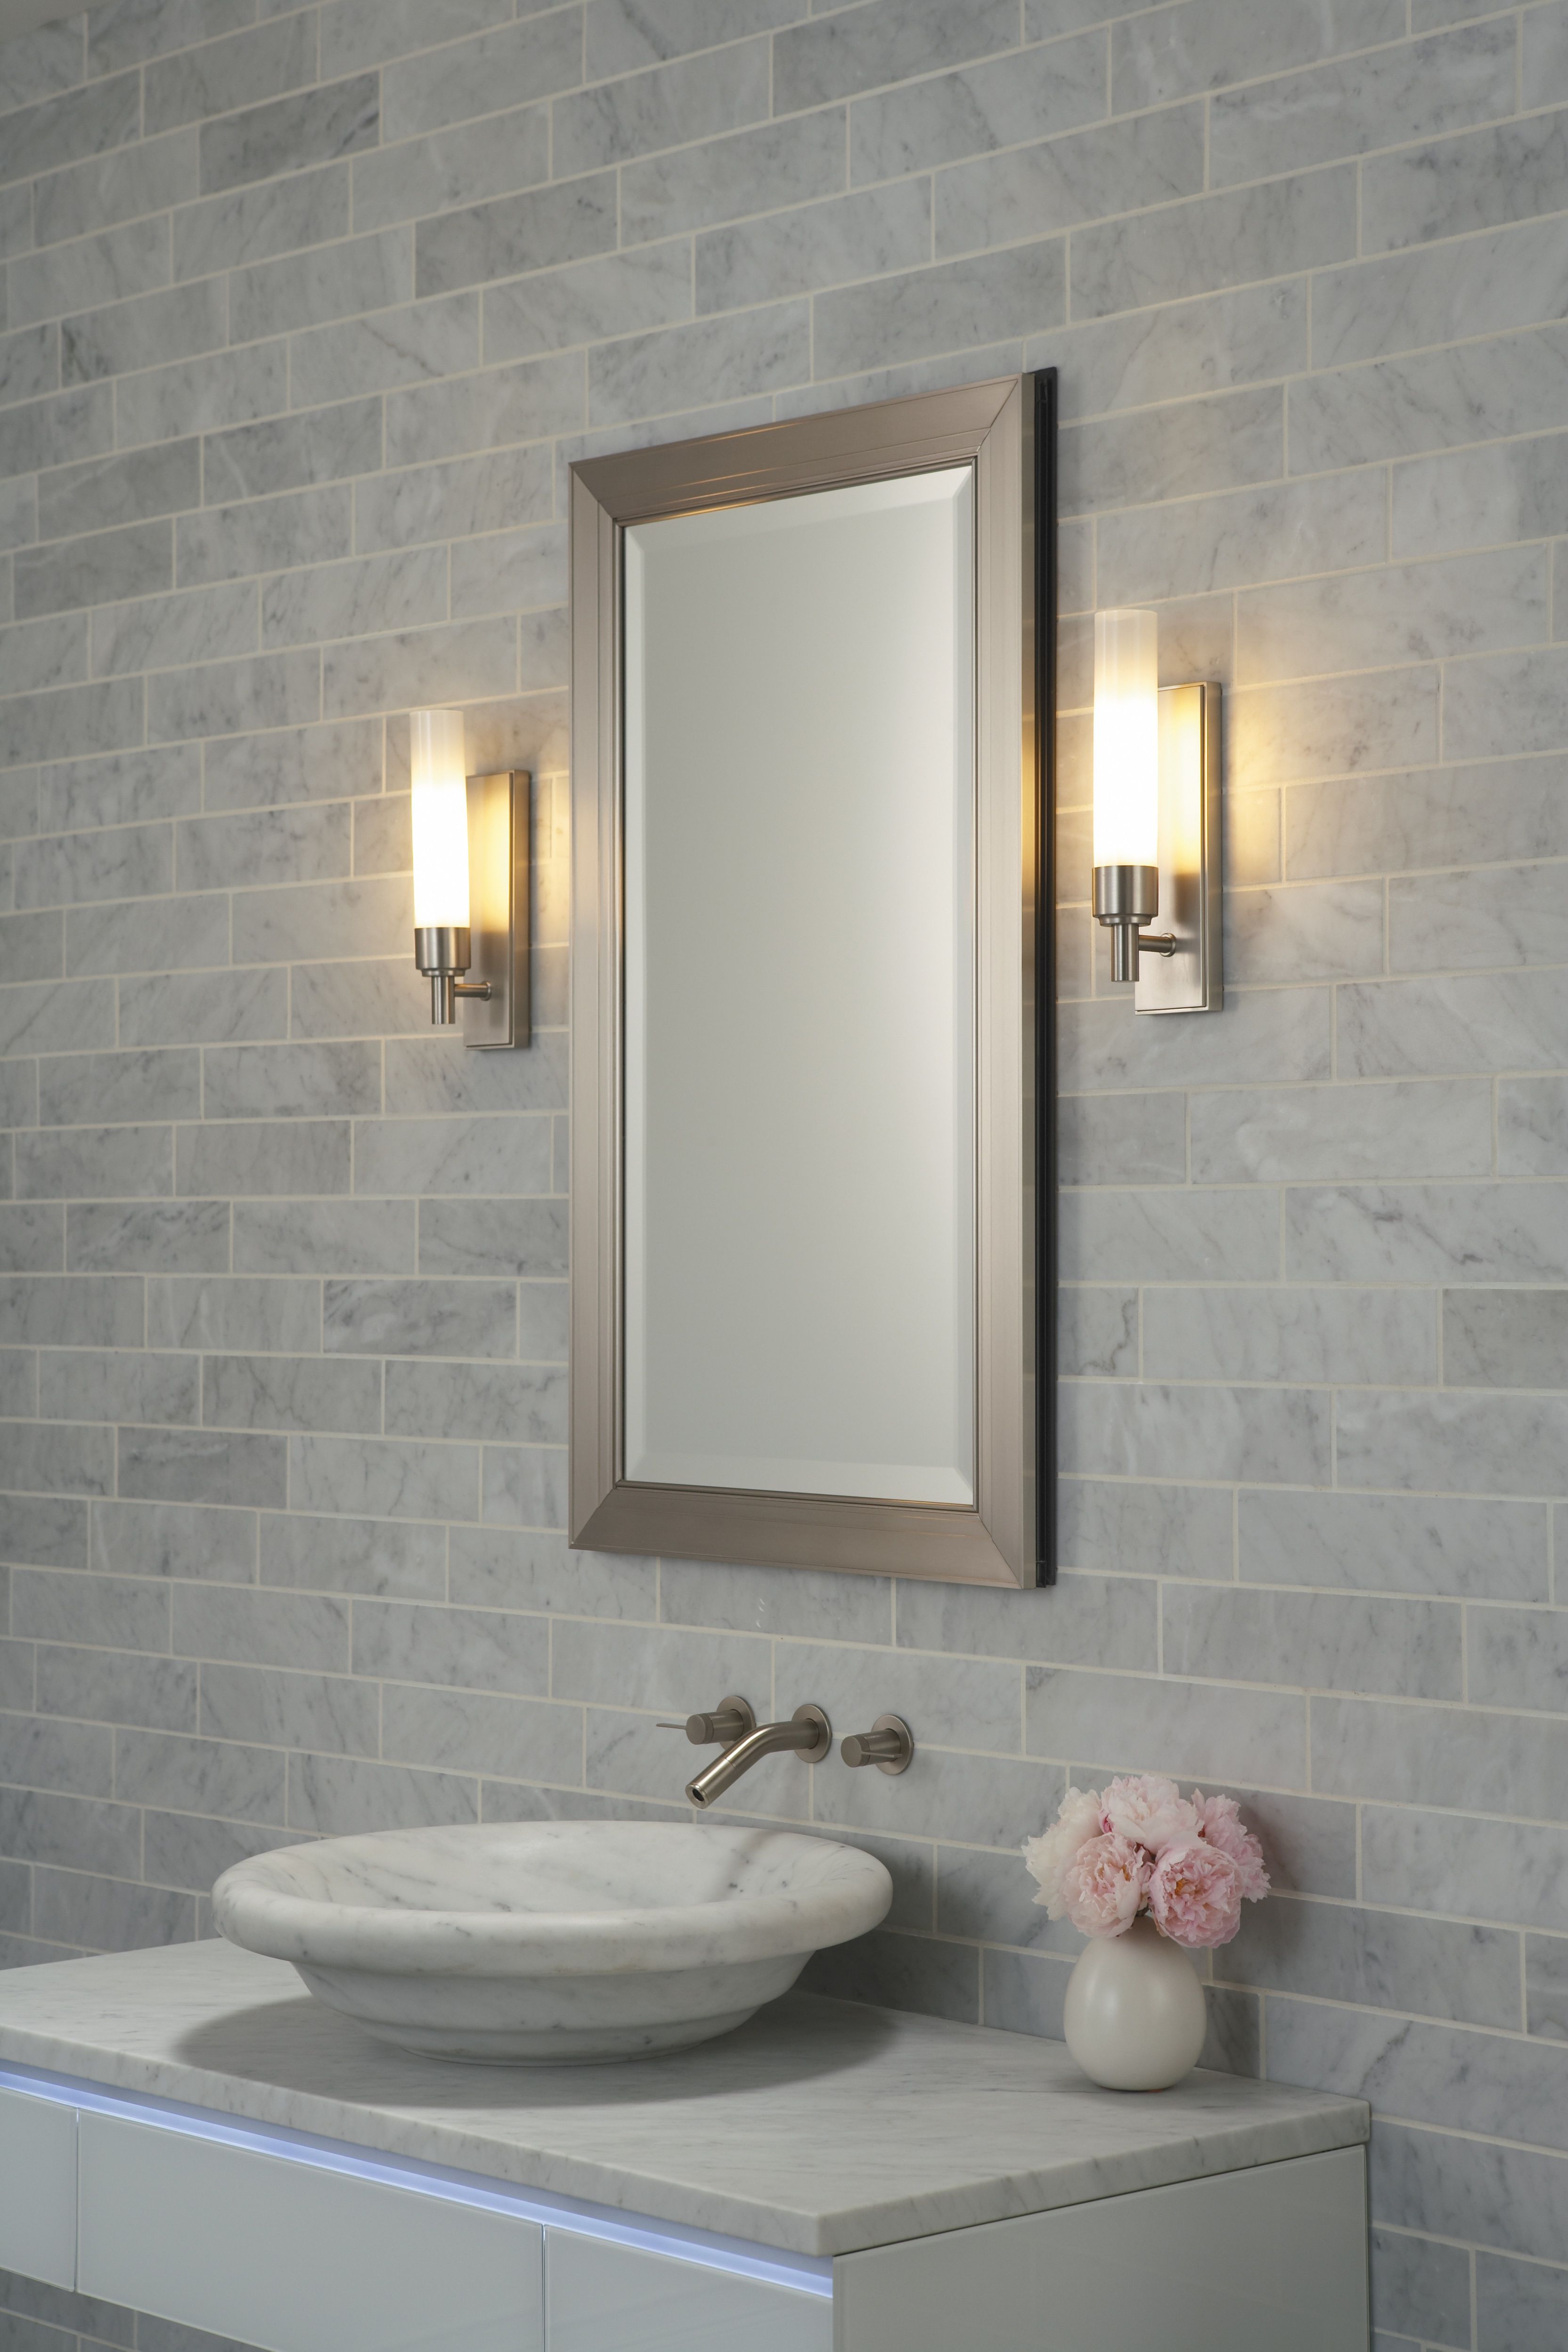 Lighting Ideas, Brushed Nickel Wall Sconcess Beside Of Metal Frame Regarding Well Liked Brushed Nickel Wall Mirrors For Bathroom (View 8 of 20)